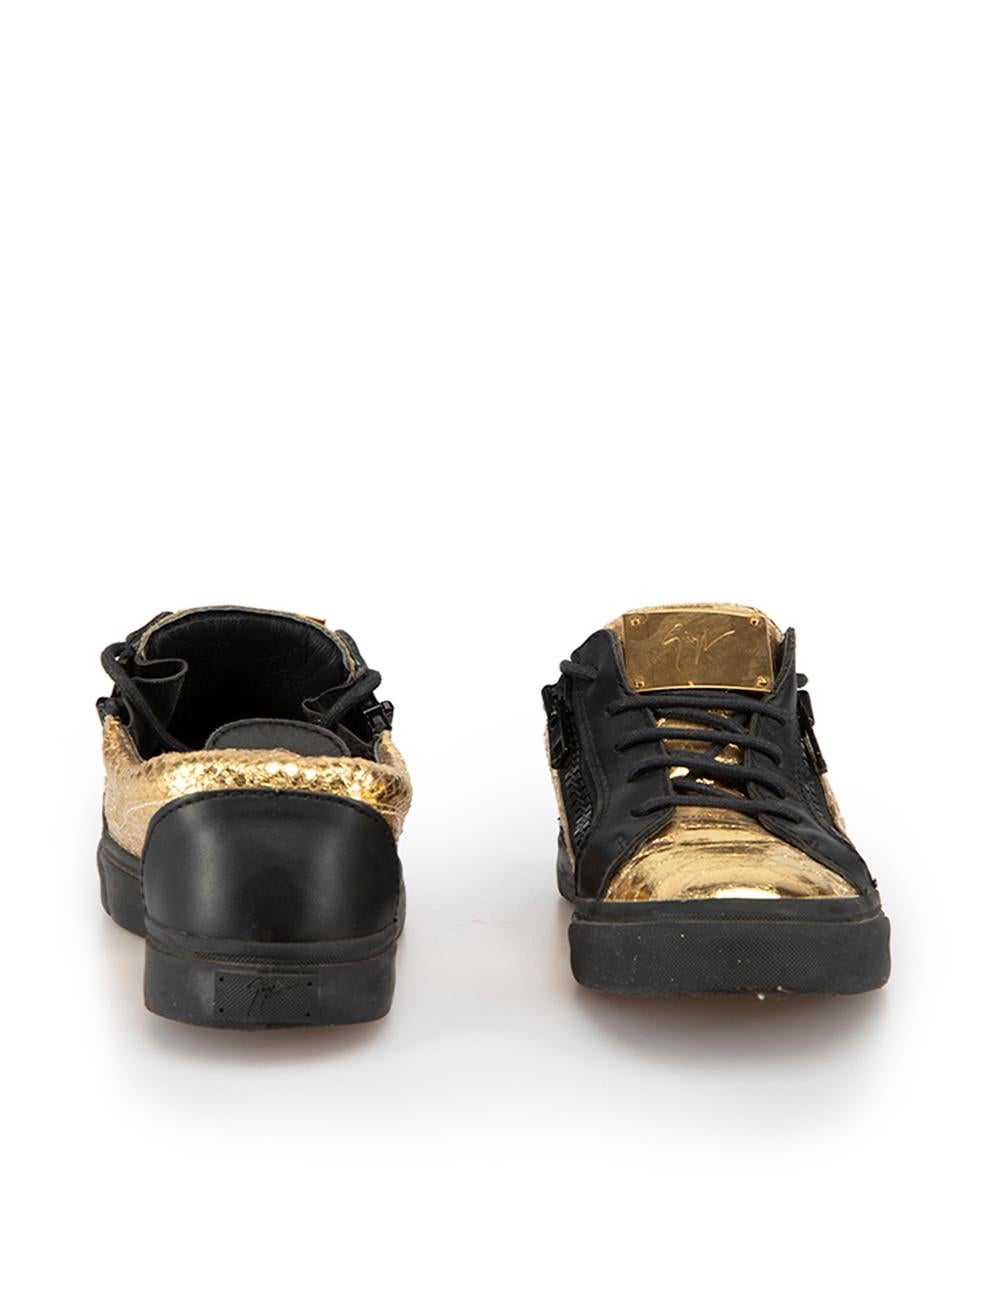 Giuseppe Zanotti Gold & Black Leather Snakeskin Embossed Trainers Size IT 36 In Good Condition For Sale In London, GB